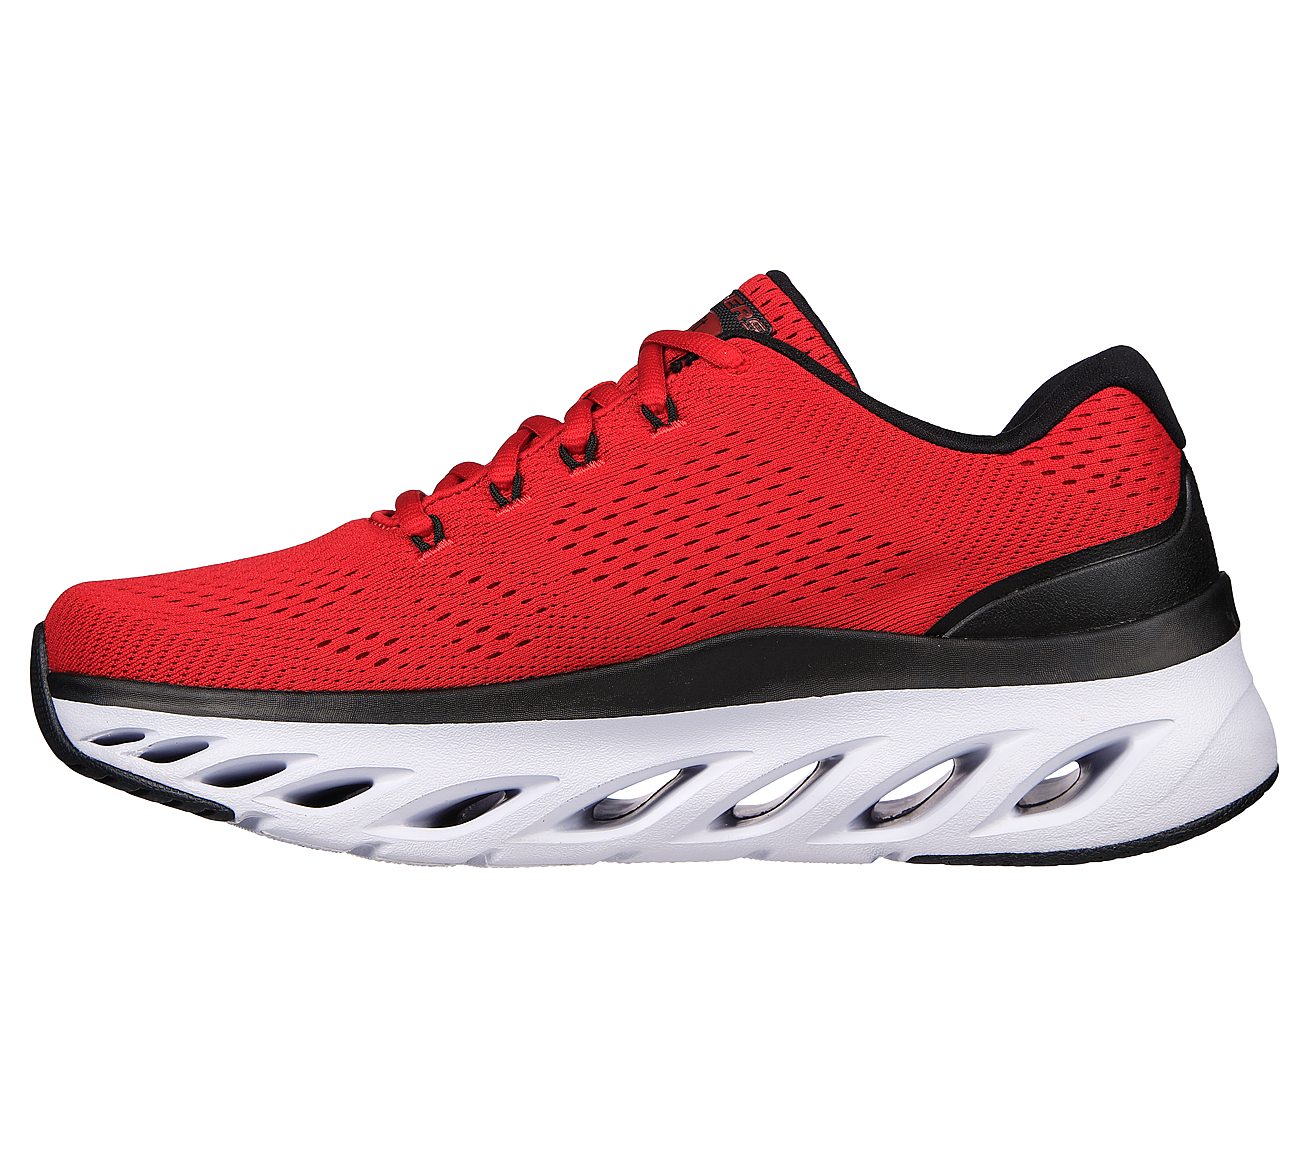 ARCH FIT GLIDE-STEP, RED/BLACK Footwear Left View